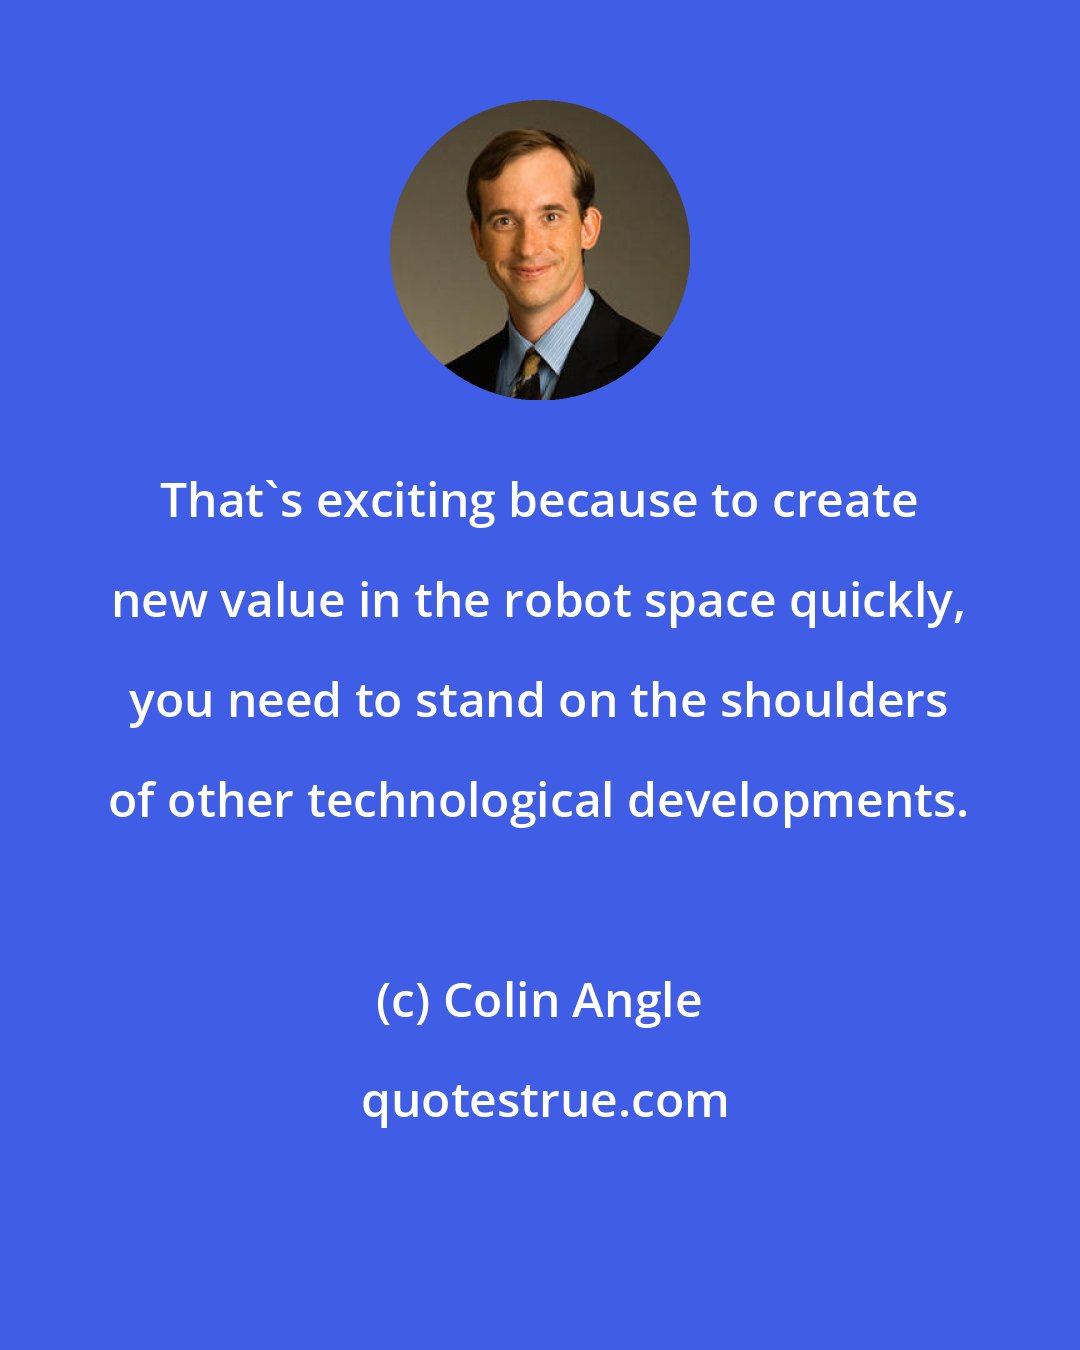 Colin Angle: That's exciting because to create new value in the robot space quickly, you need to stand on the shoulders of other technological developments.